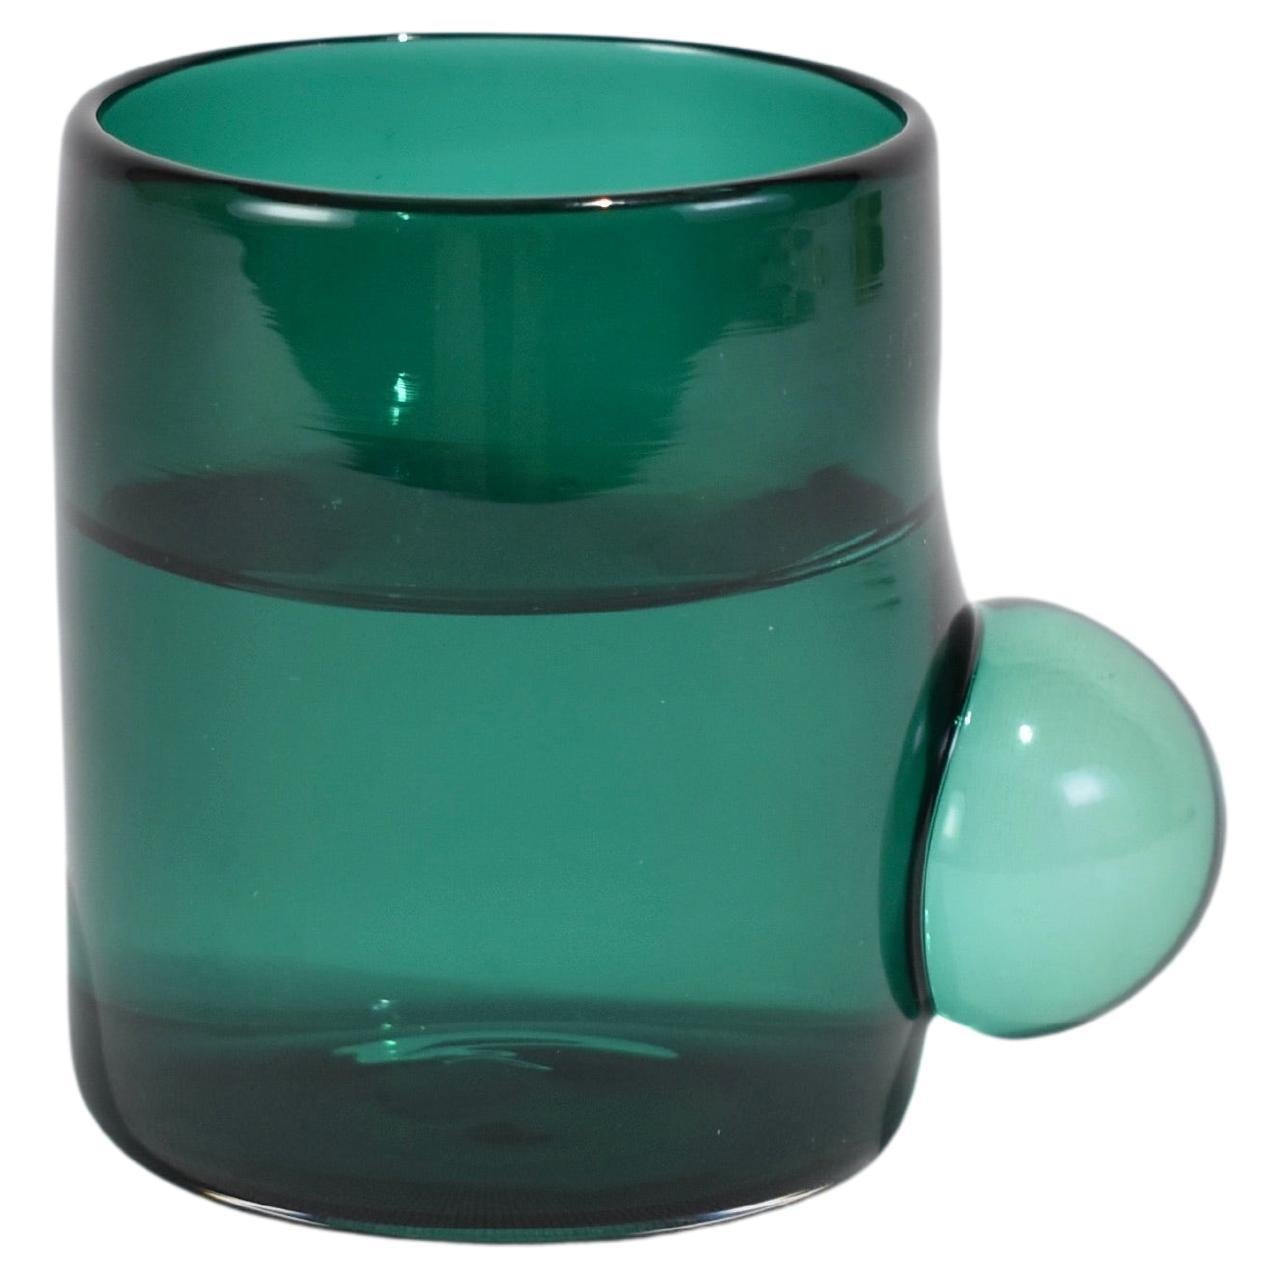 Bubble Cup in Teal